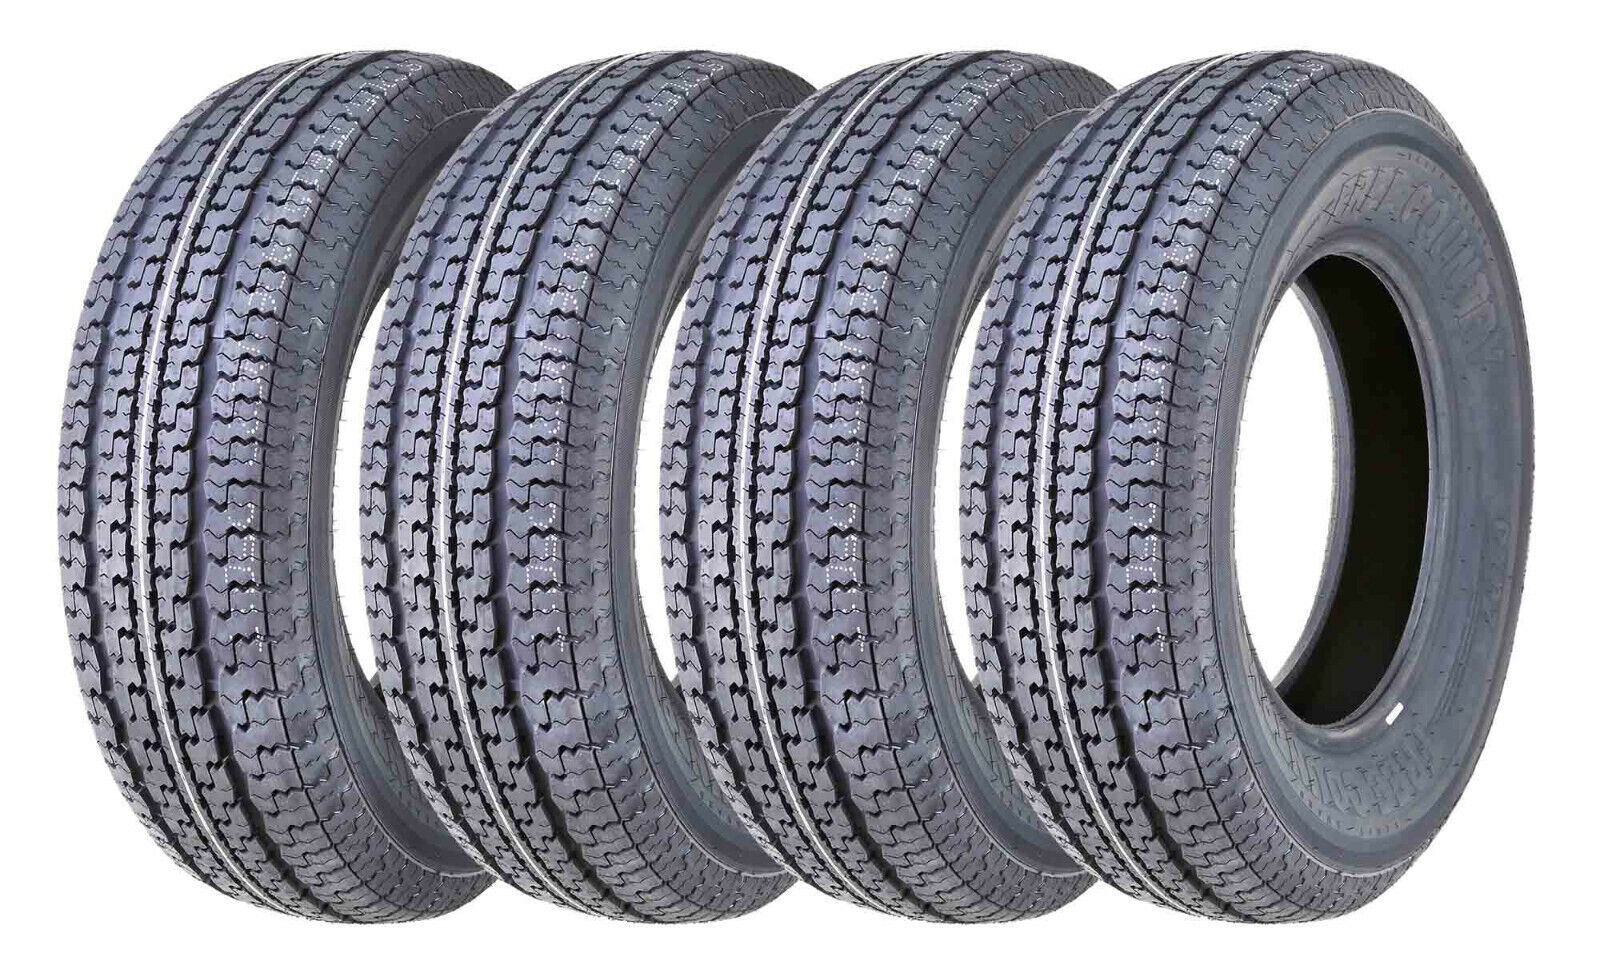 FREE COUNTRY Trailer Tires ST215/75R14 8PR LR D w/Featured Scuff Guard , Set 4